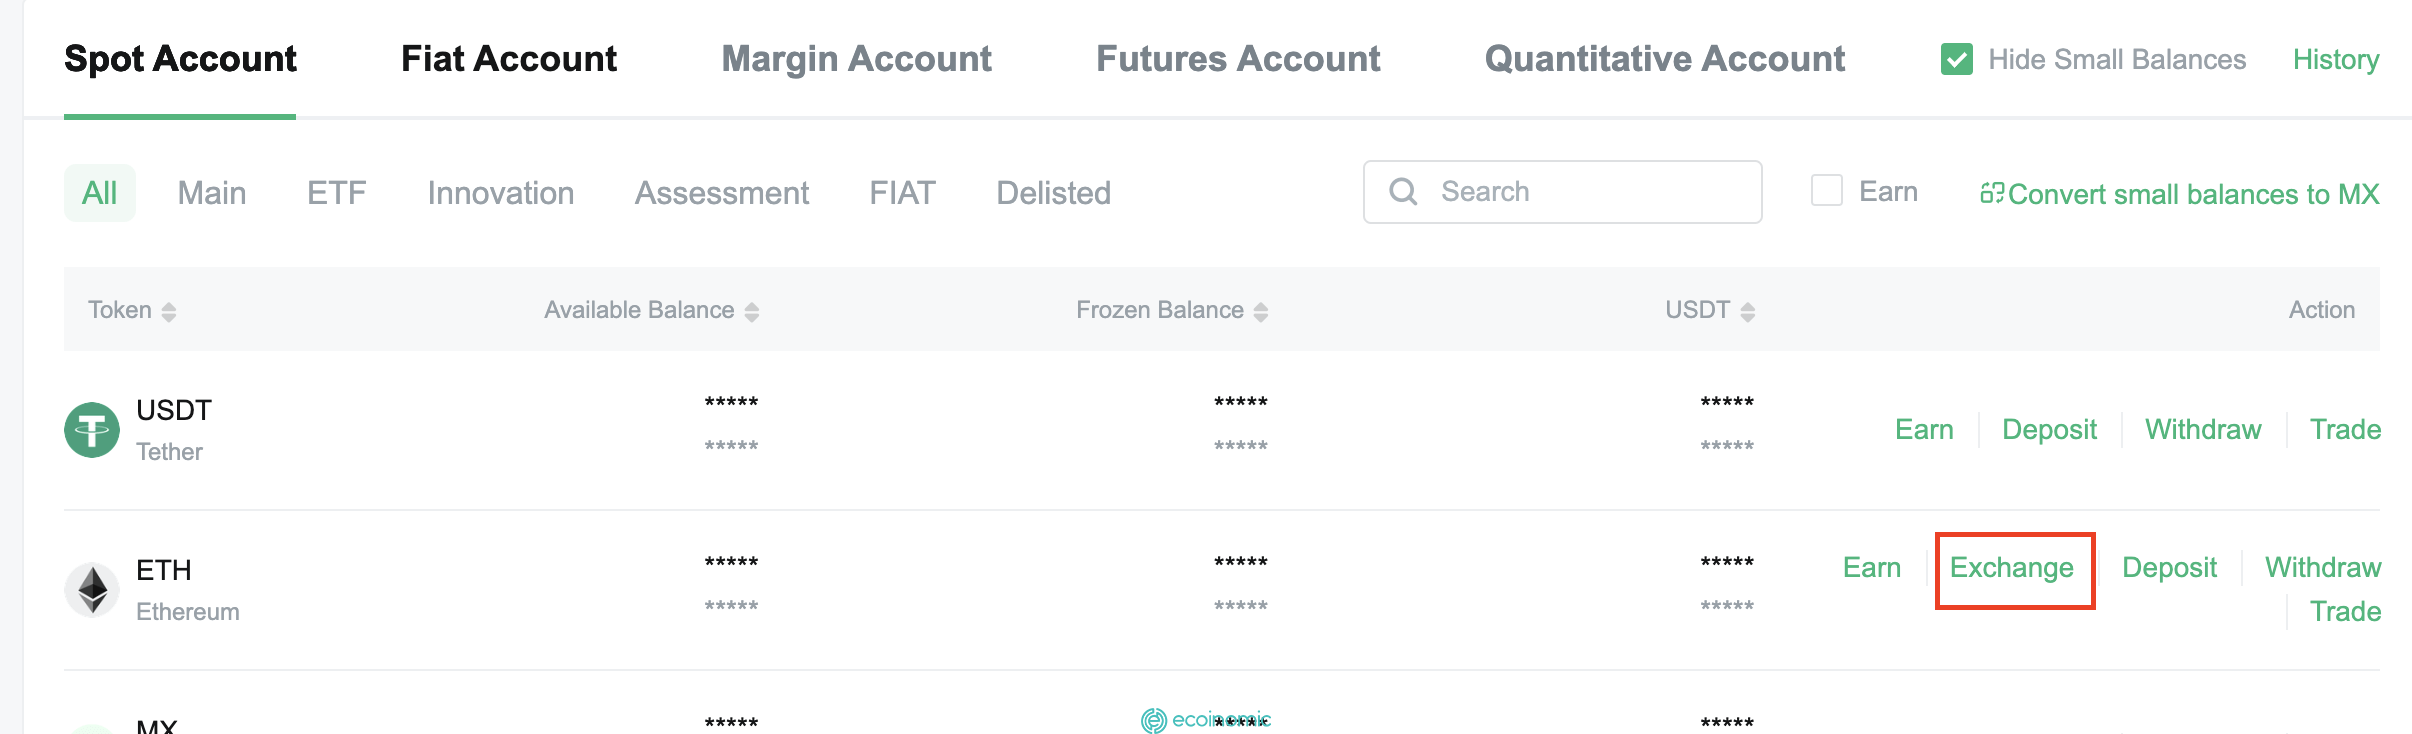 Find ETH in your Spot account, click Exchange